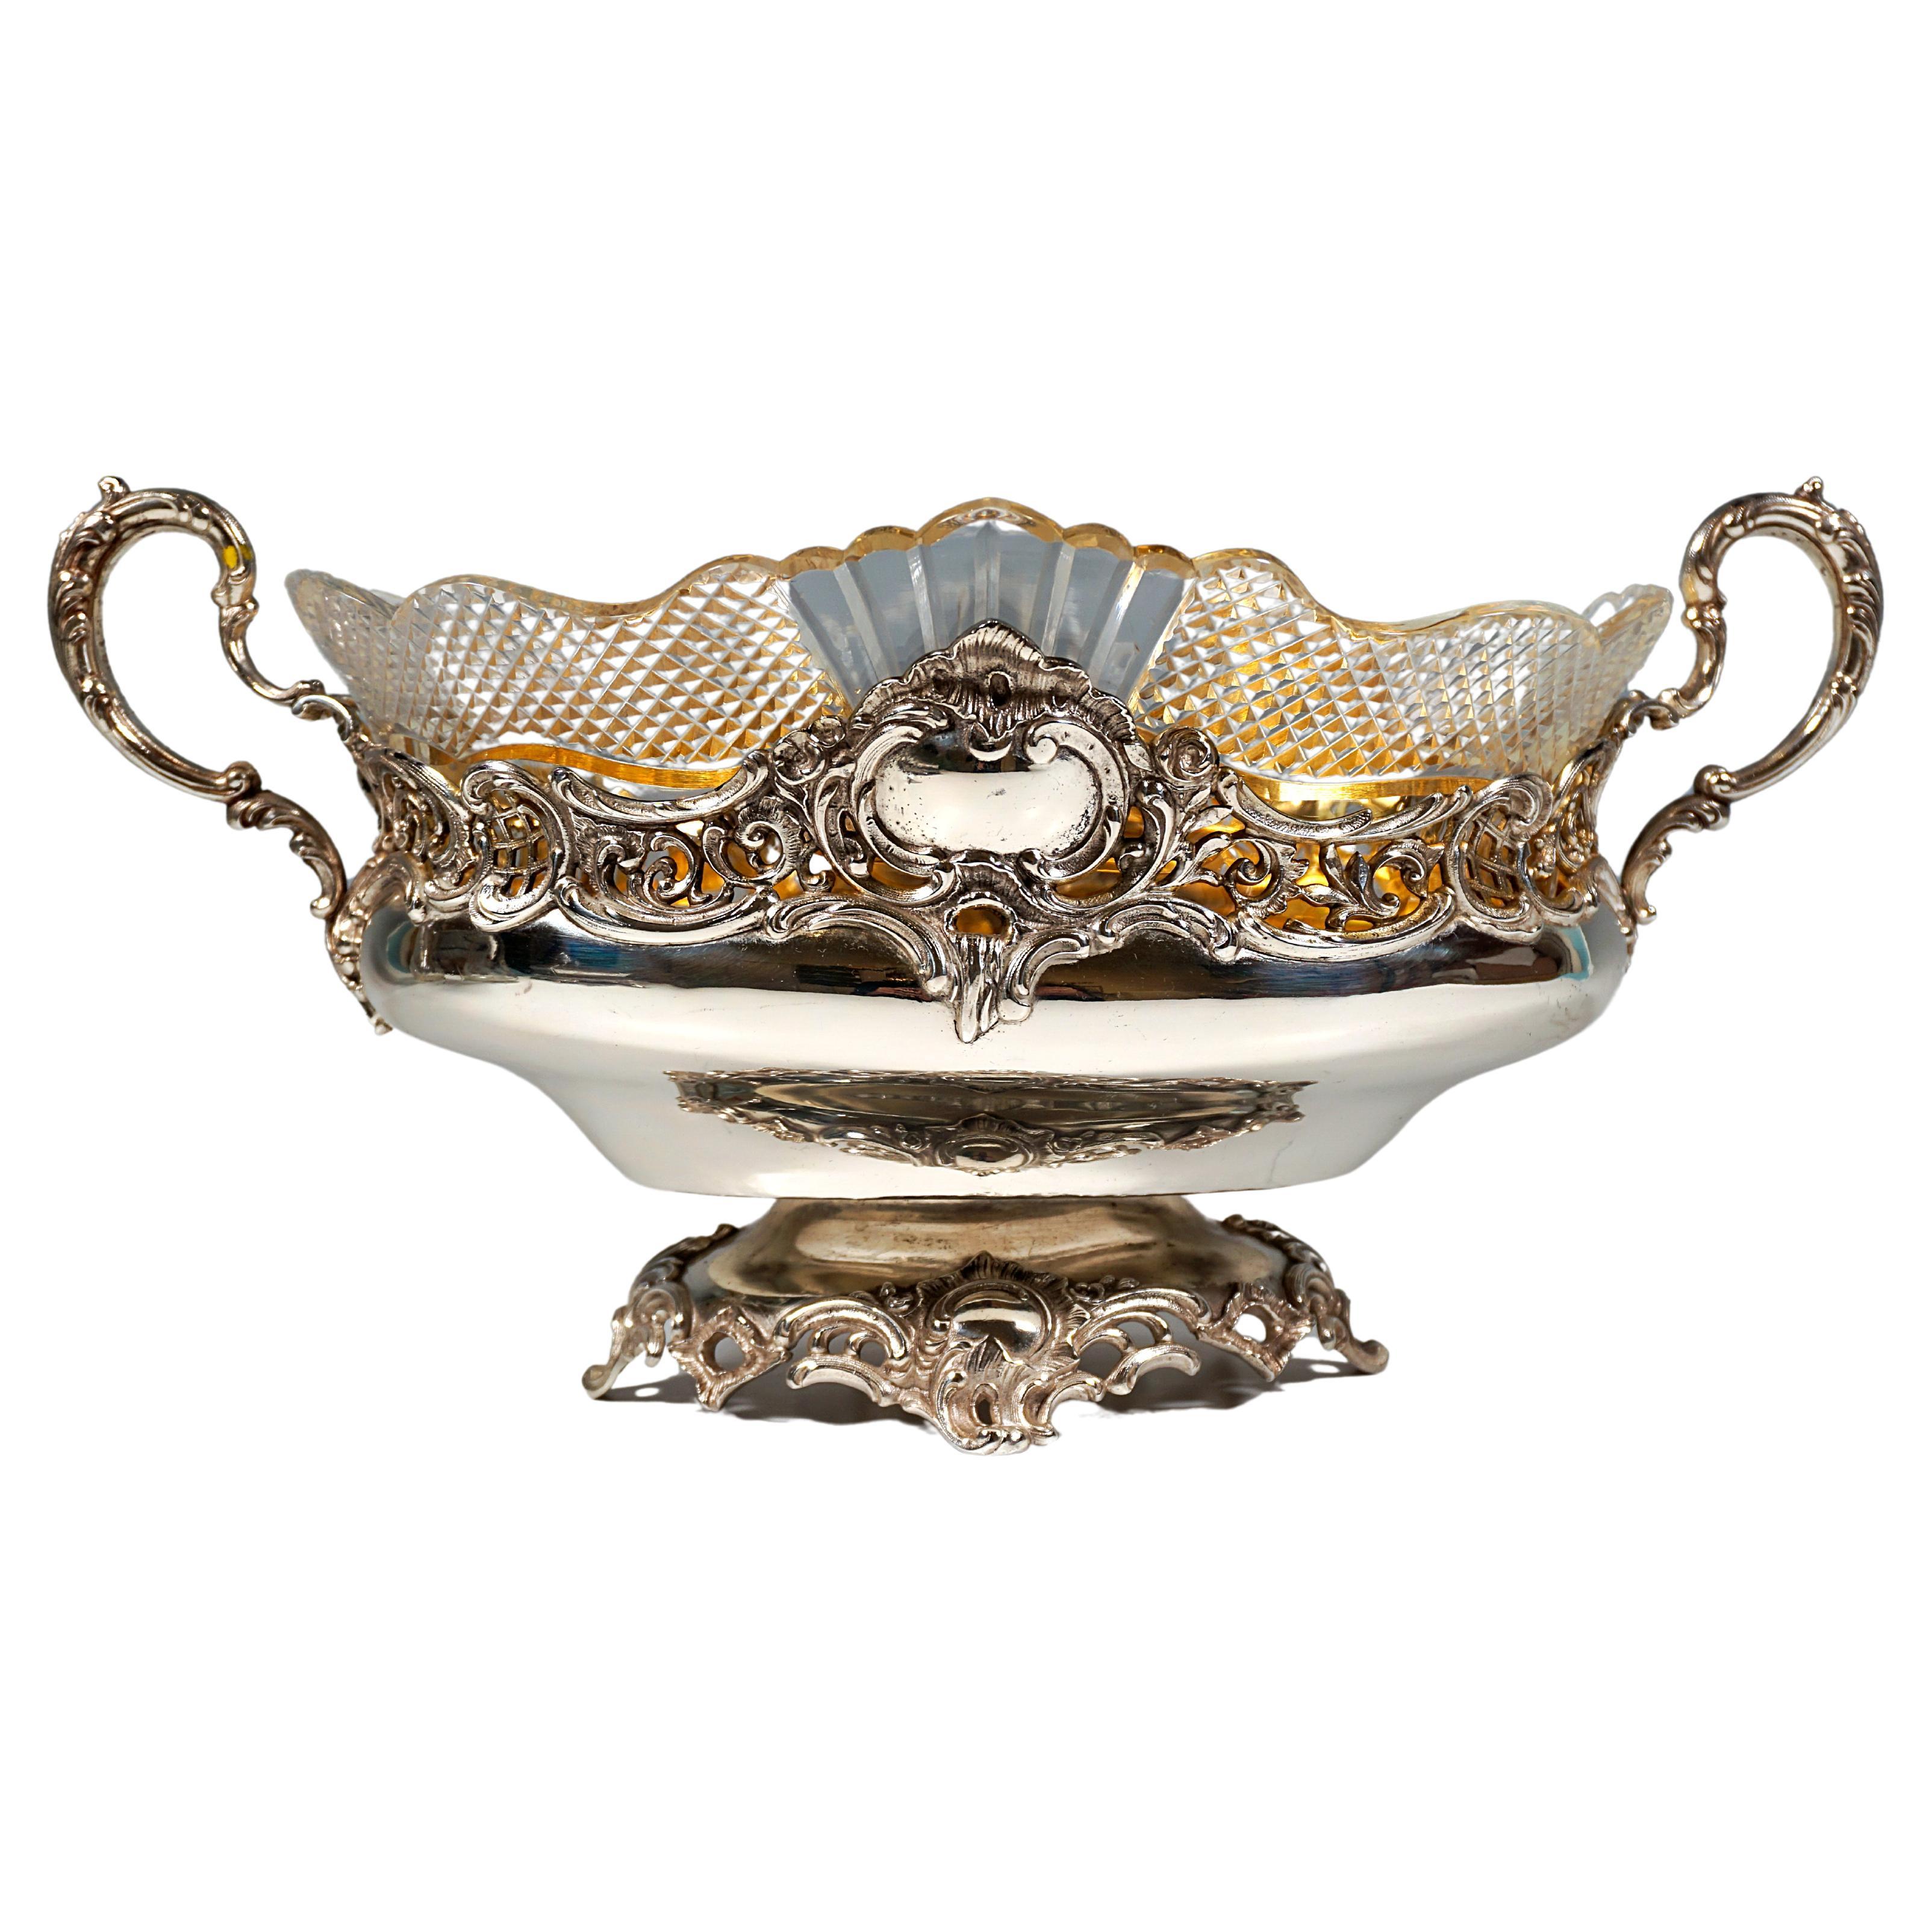 Silver Jardiniere With Artfully Cut Glass Insert, Wilkens & Sons Germany, 1894